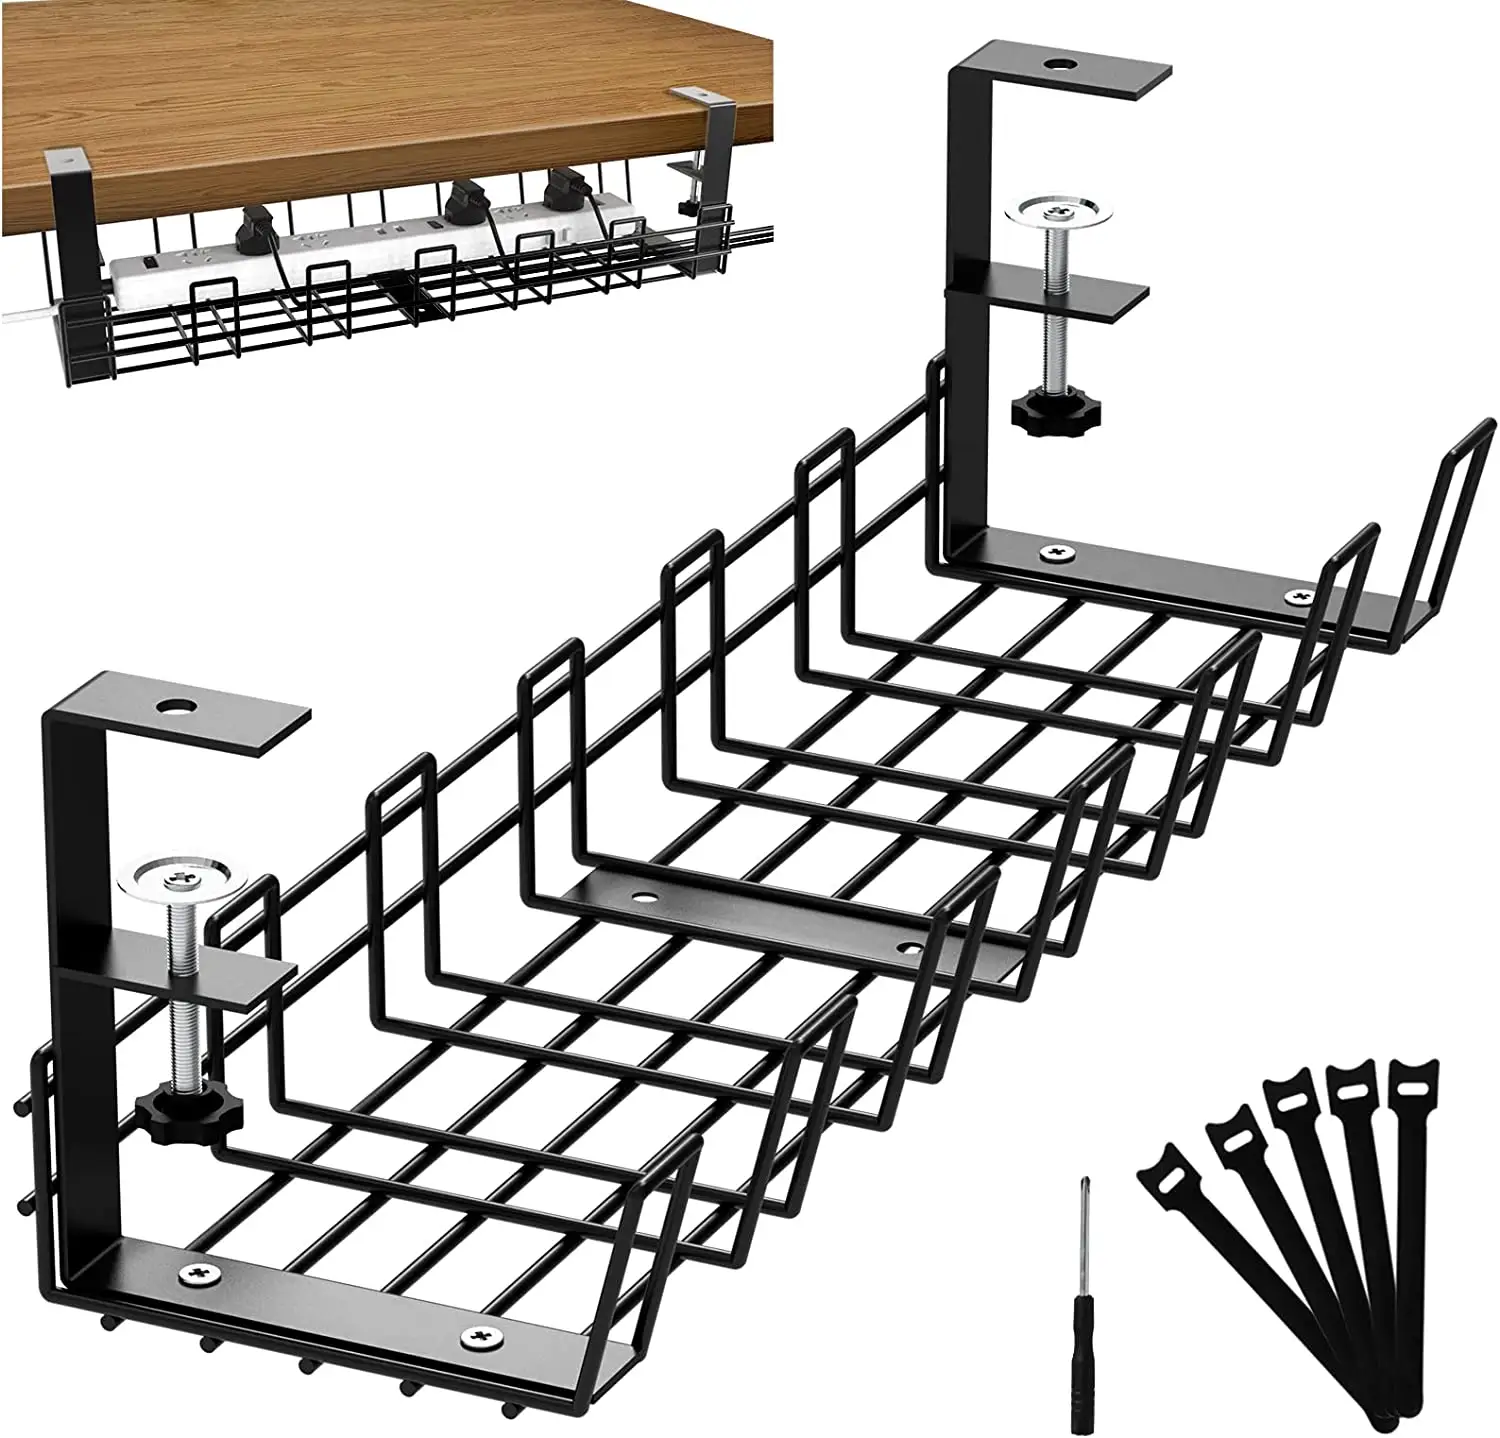 No Drill Cable Tray Basket for Wire Management, Sturdy Metal Cable Management Under Desk with Clamp for Home Office